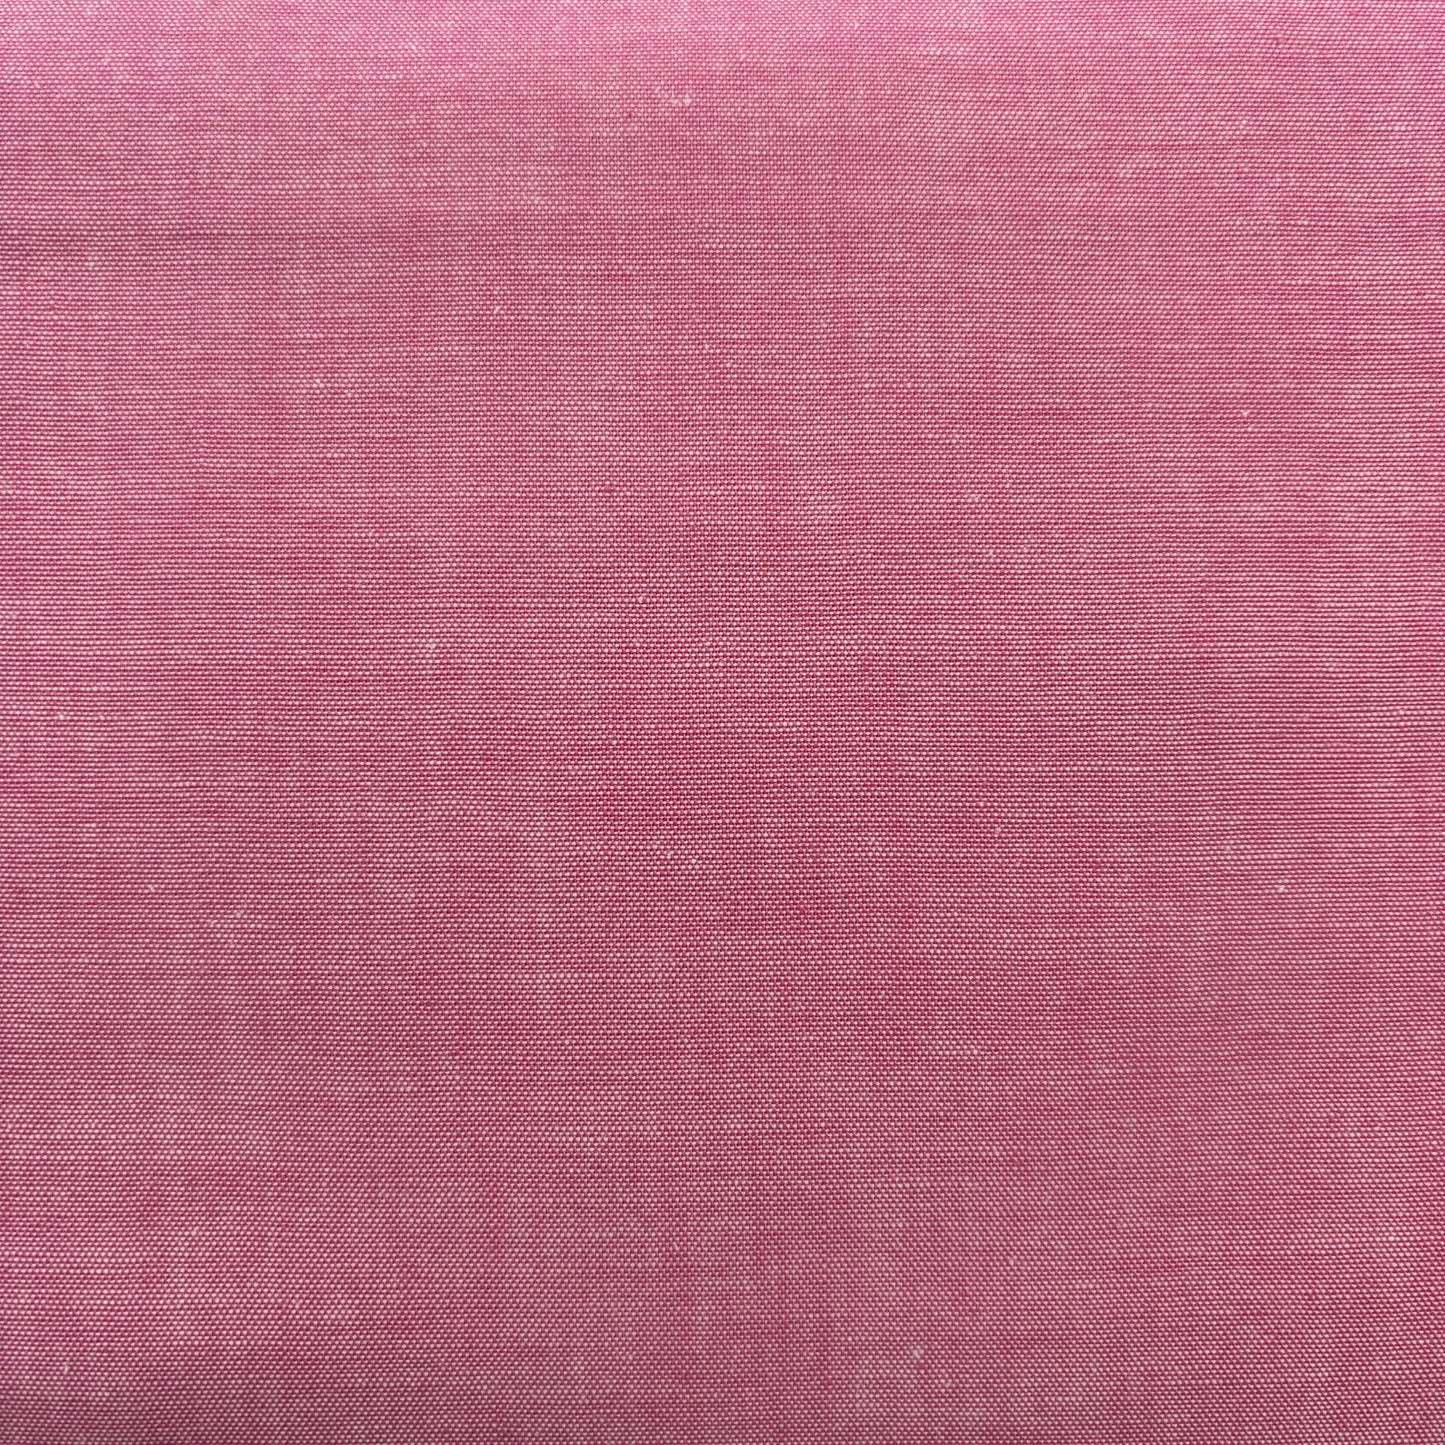 Japanese Solid - Yarn Dyed - Cherry Pink